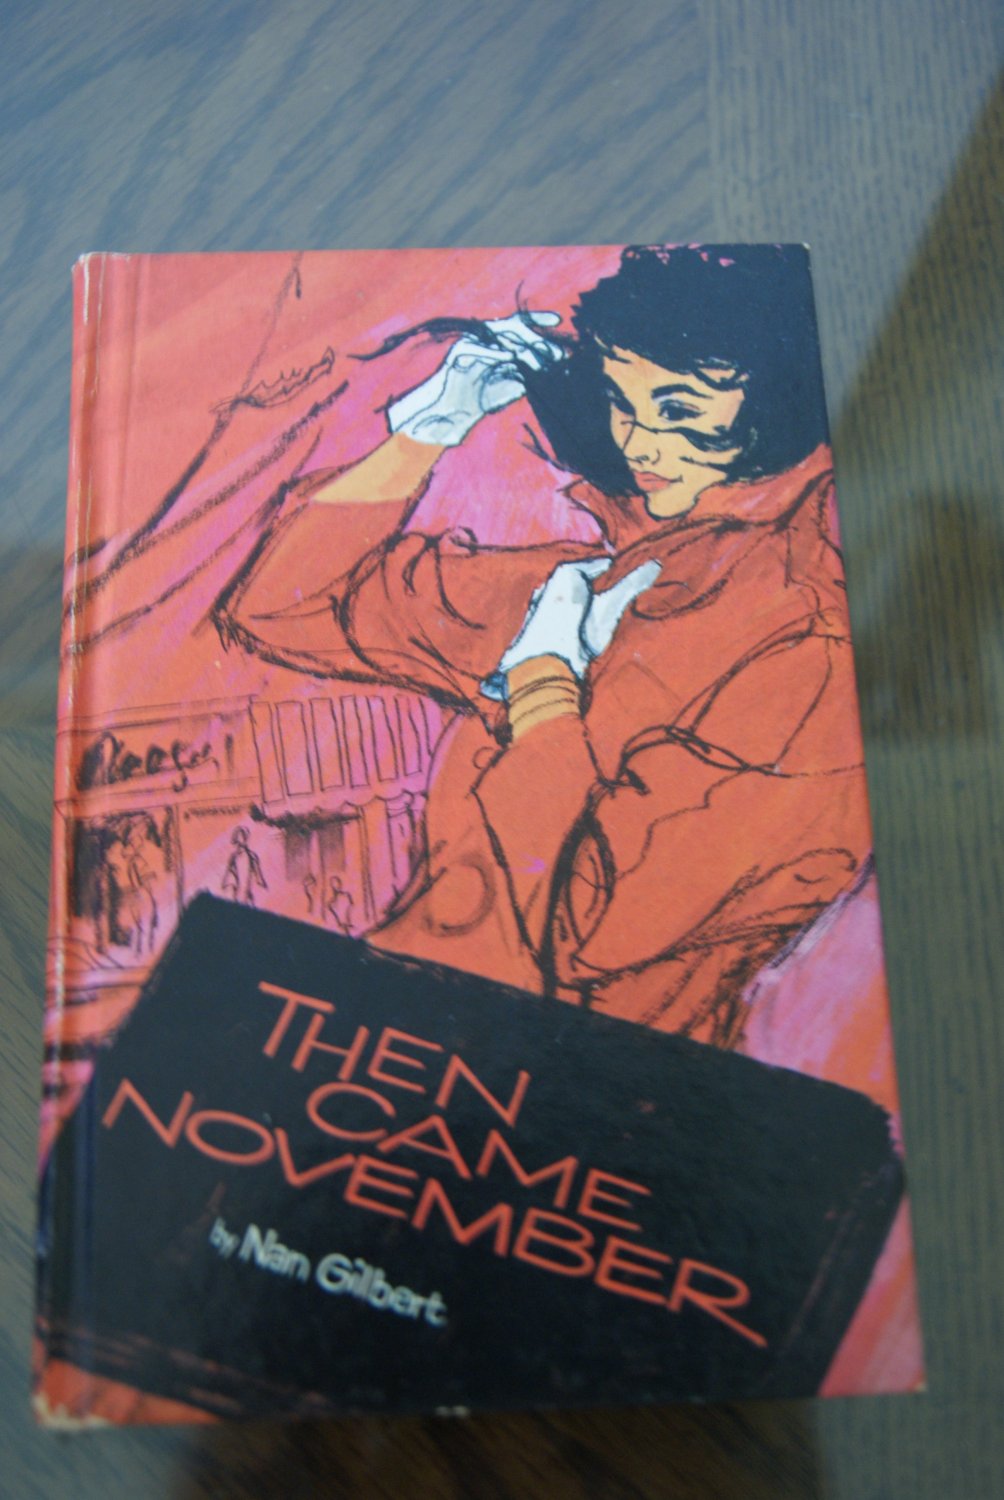 Then came November /  The Forest Fire Mystery / Whitman book